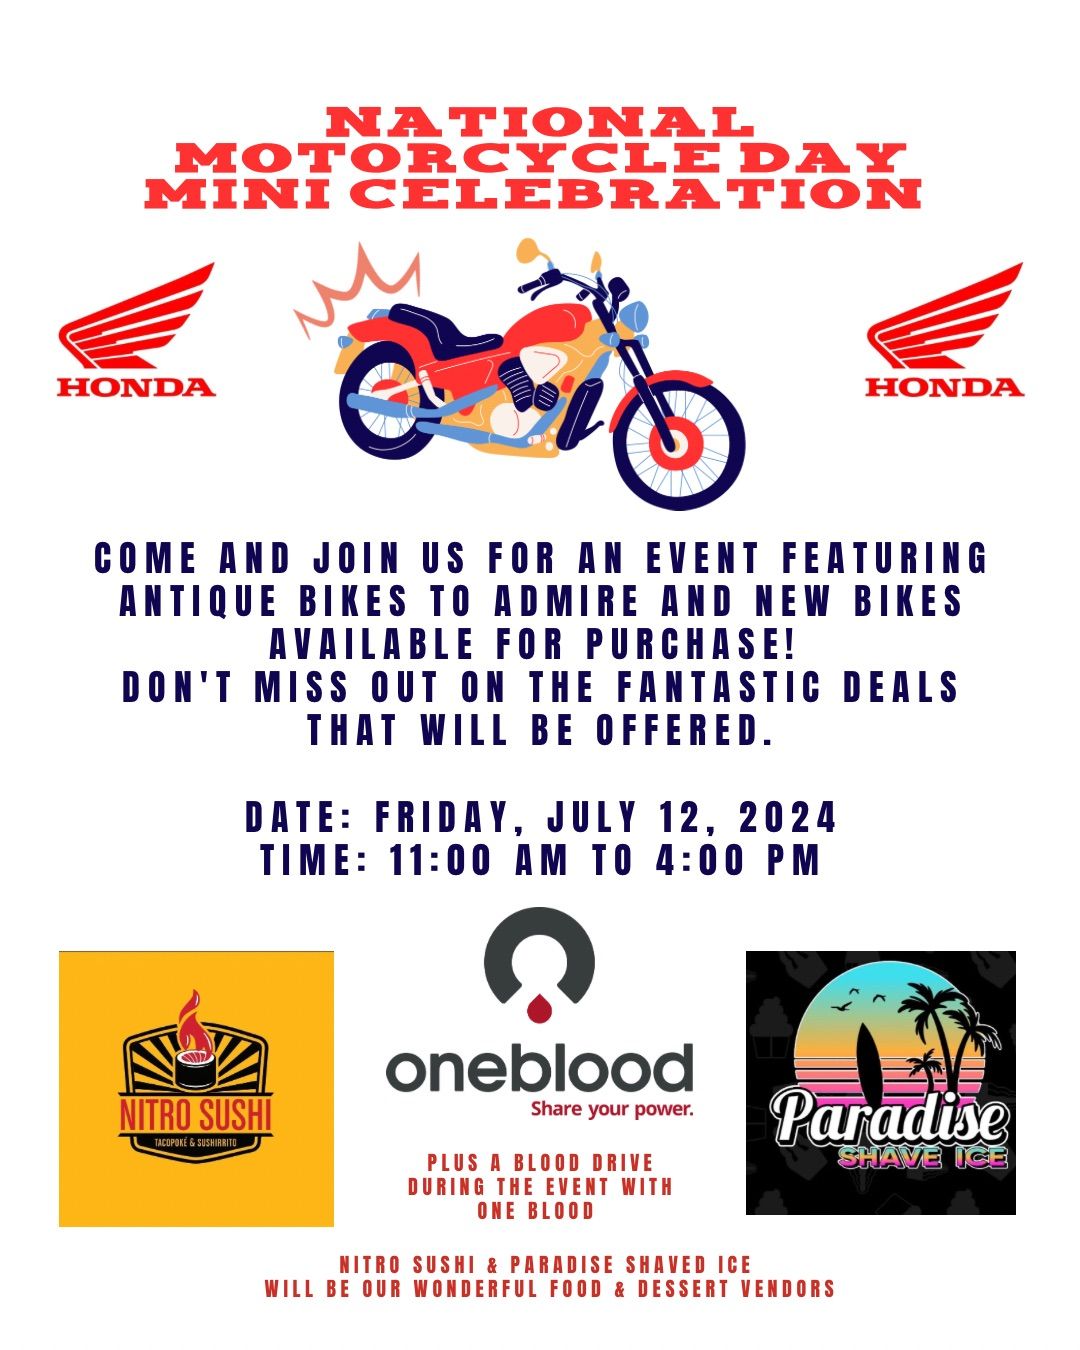 Mini celebration for National Motorcycle Day!